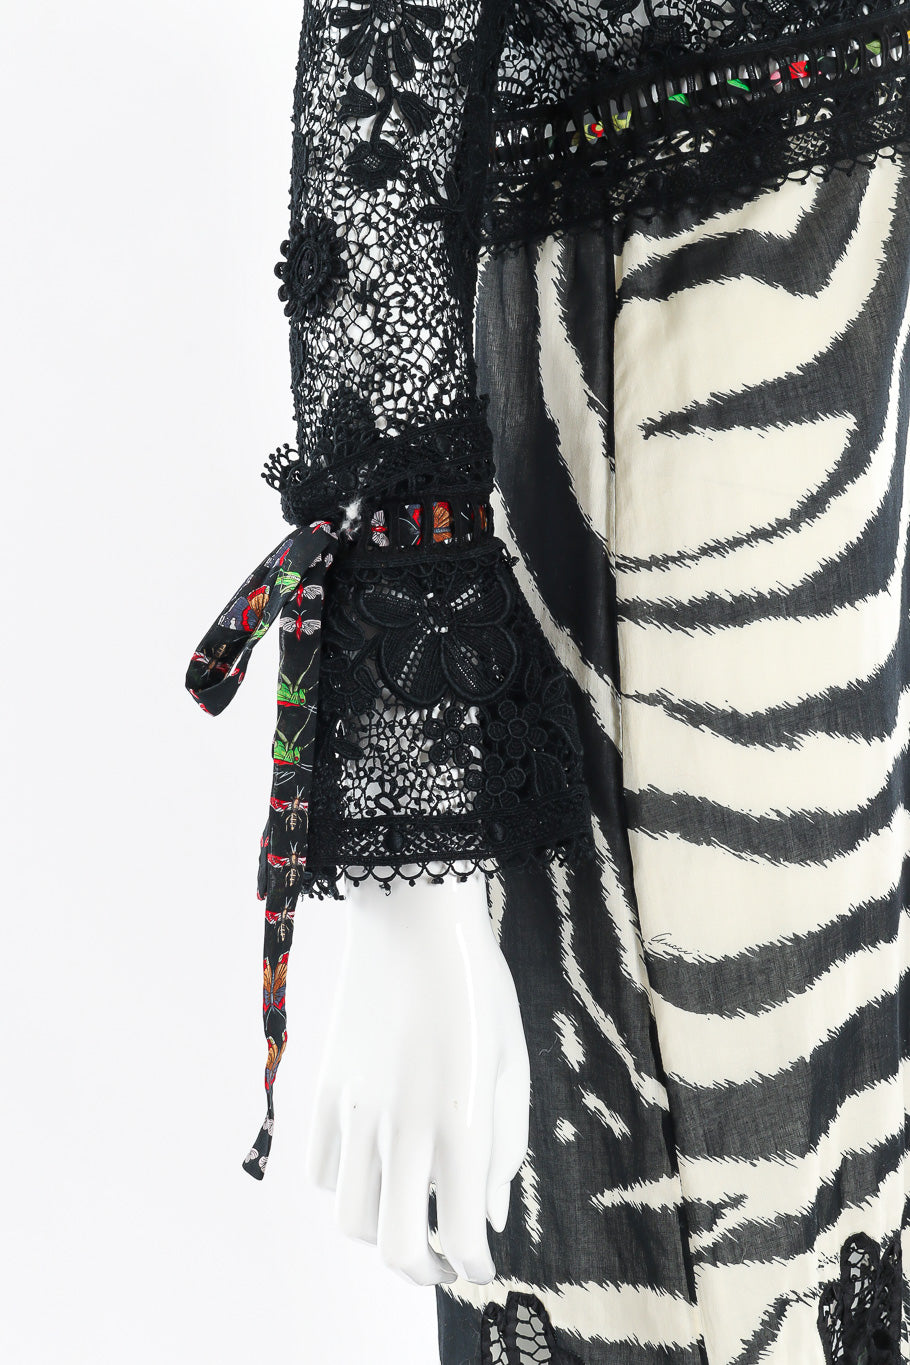 Lace and zebra print dress by Tom Ford for Gucci Sleeve photo. @recessla